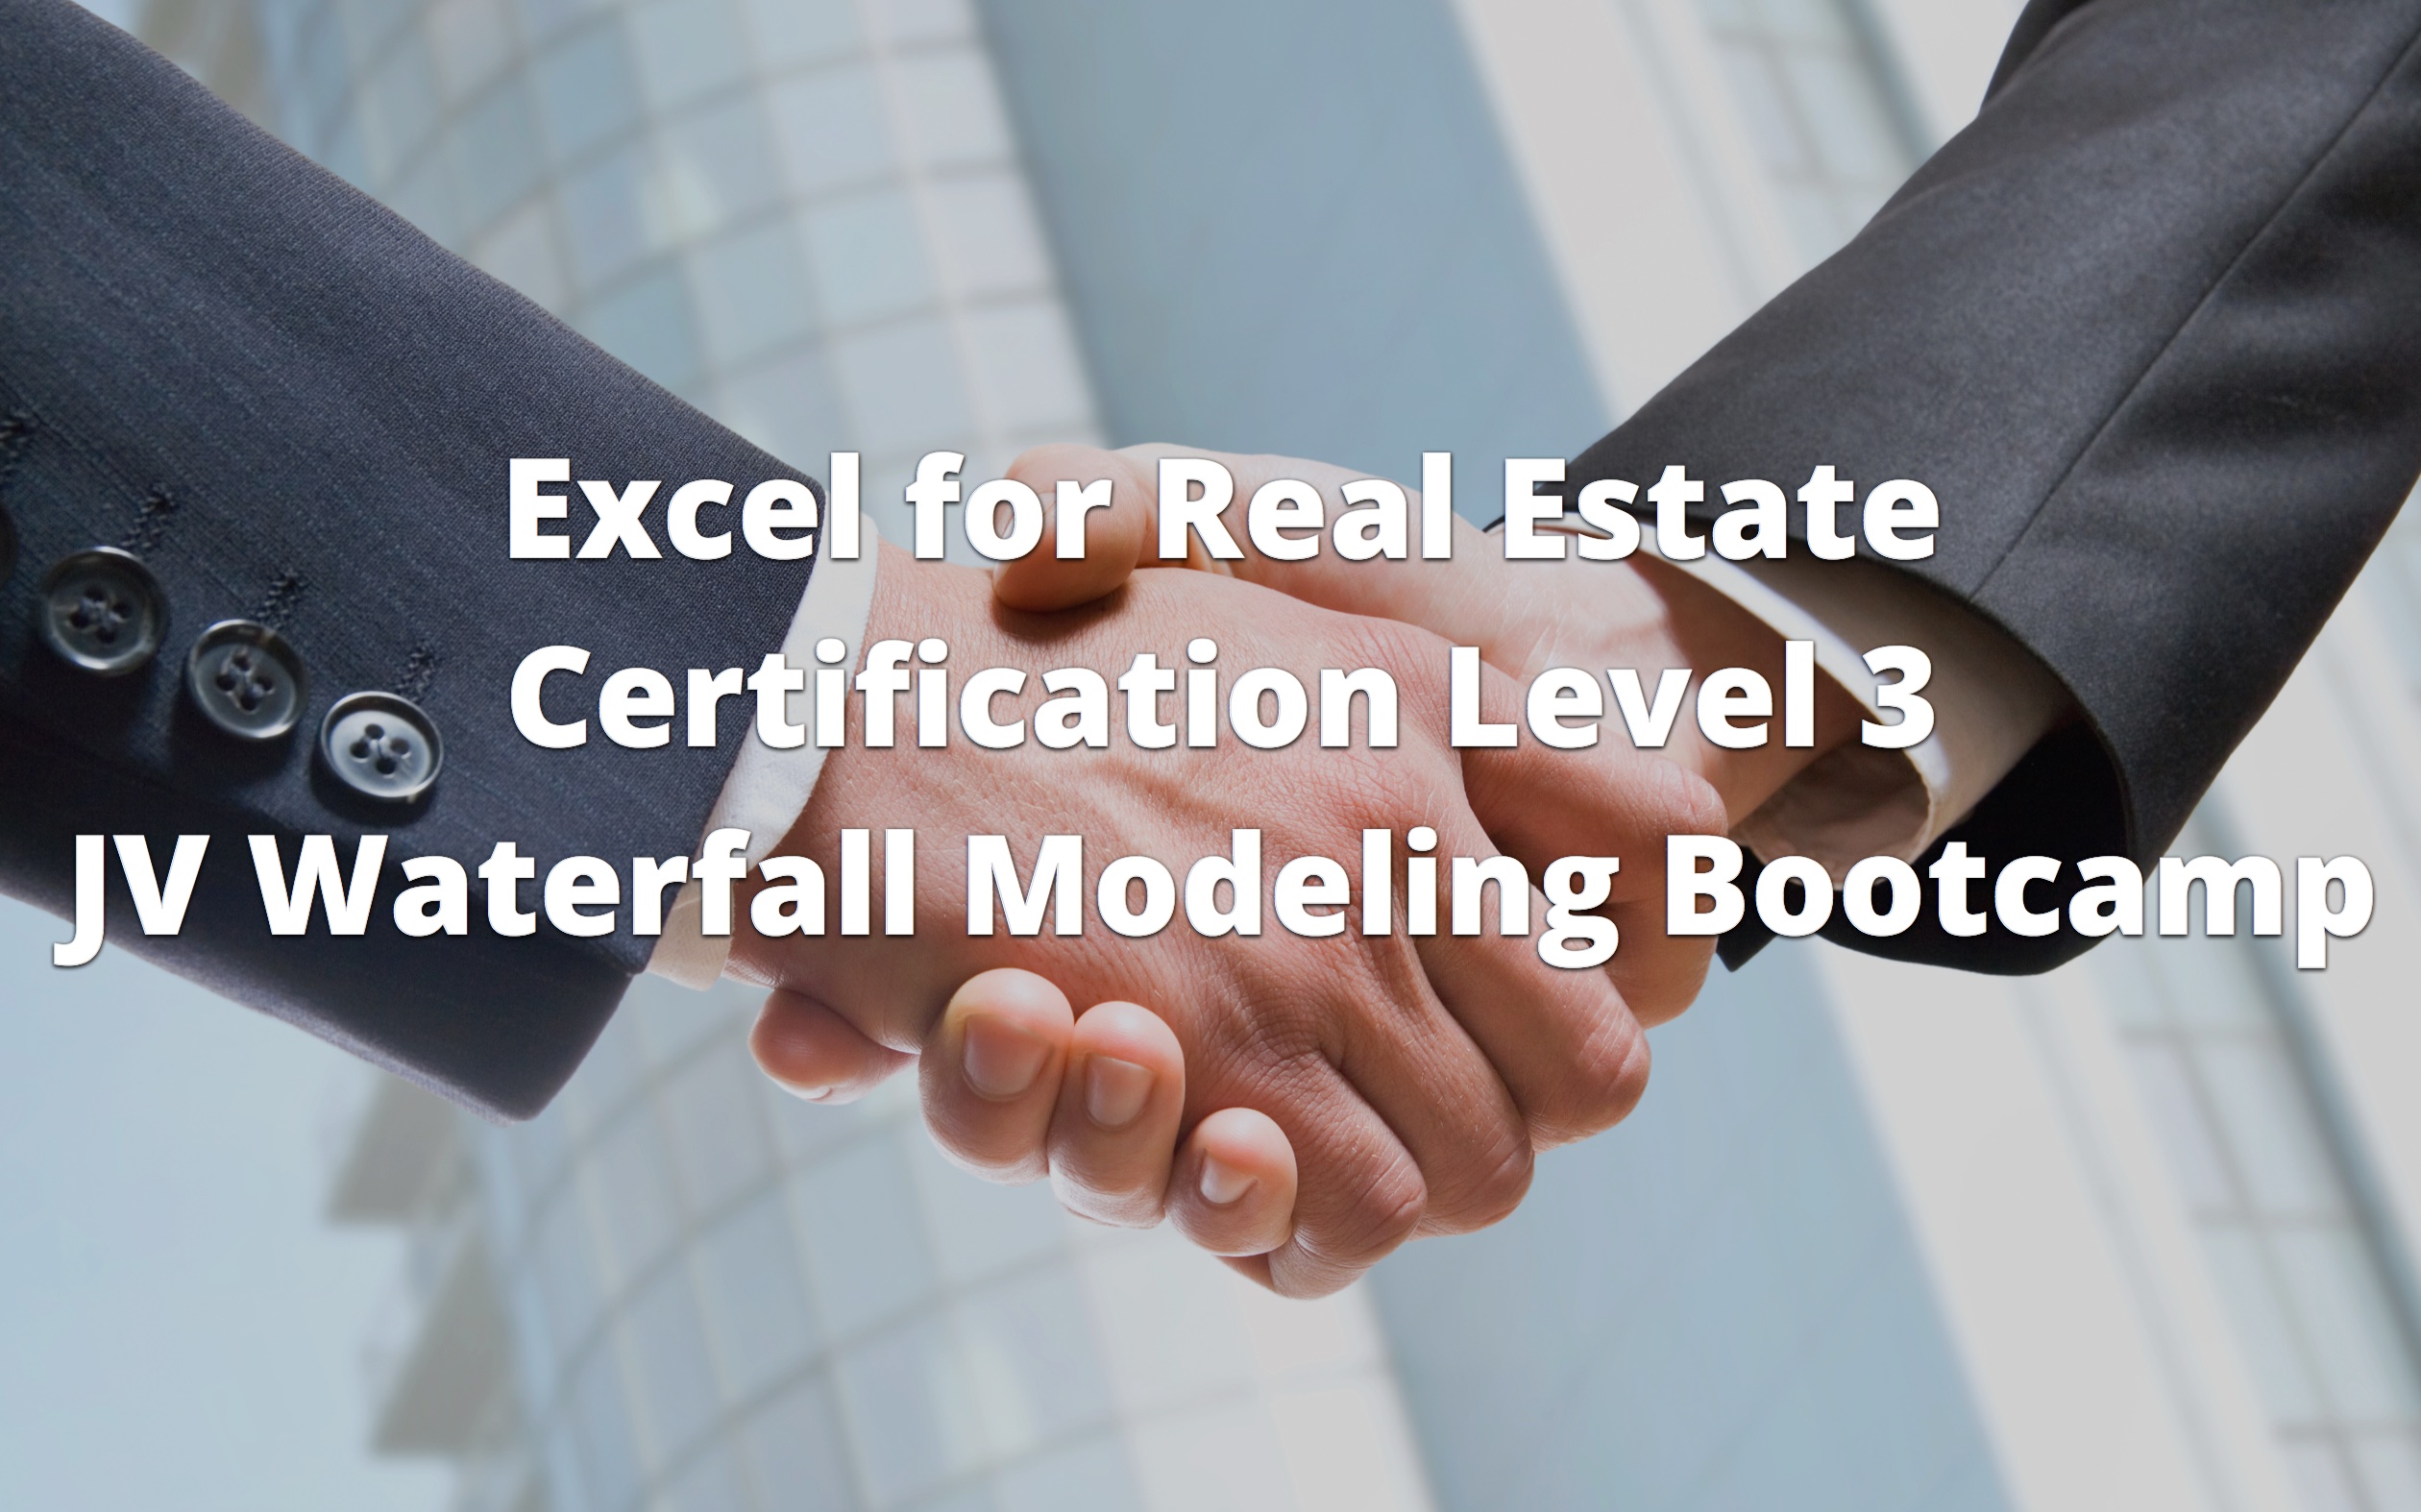 Excel for Real Estate Certification Level 3 Course